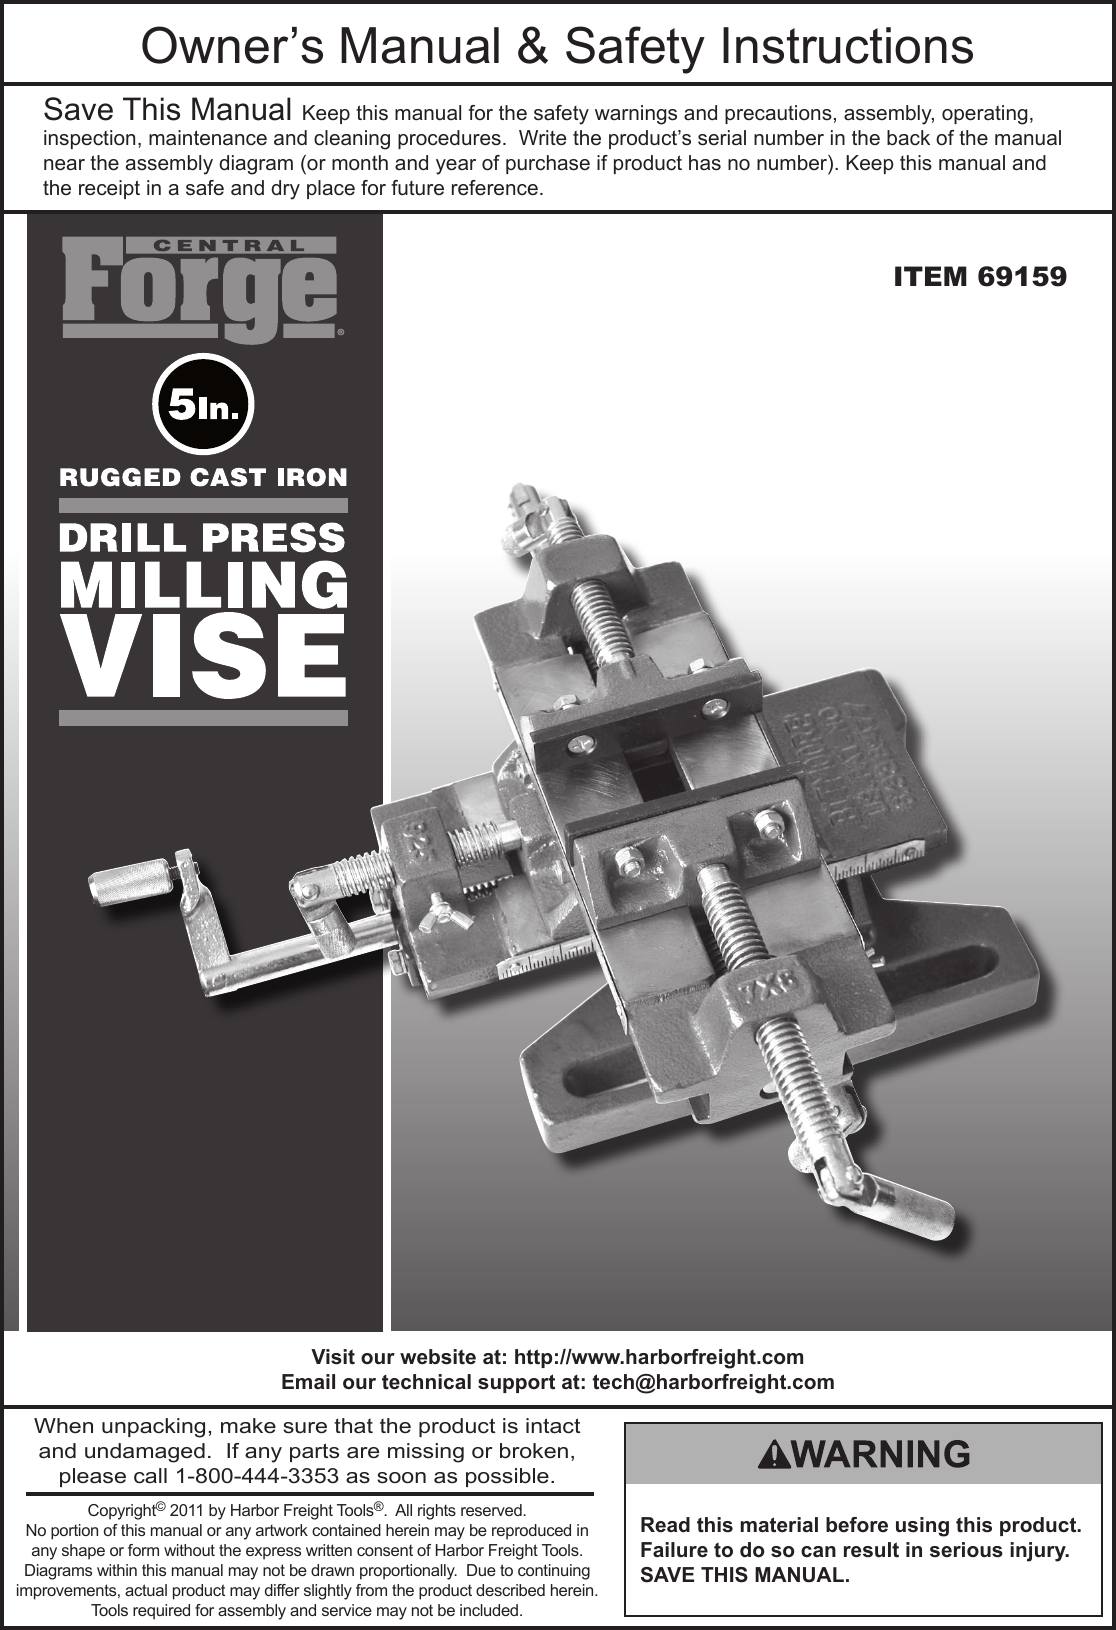 Page 1 of 8 - Harbor-Freight Harbor-Freight-5-In-Rugged-Cast-Iron-Drill-Press-Milling-Vise-Product-Manual-  Harbor-freight-5-in-rugged-cast-iron-drill-press-milling-vise-product-manual